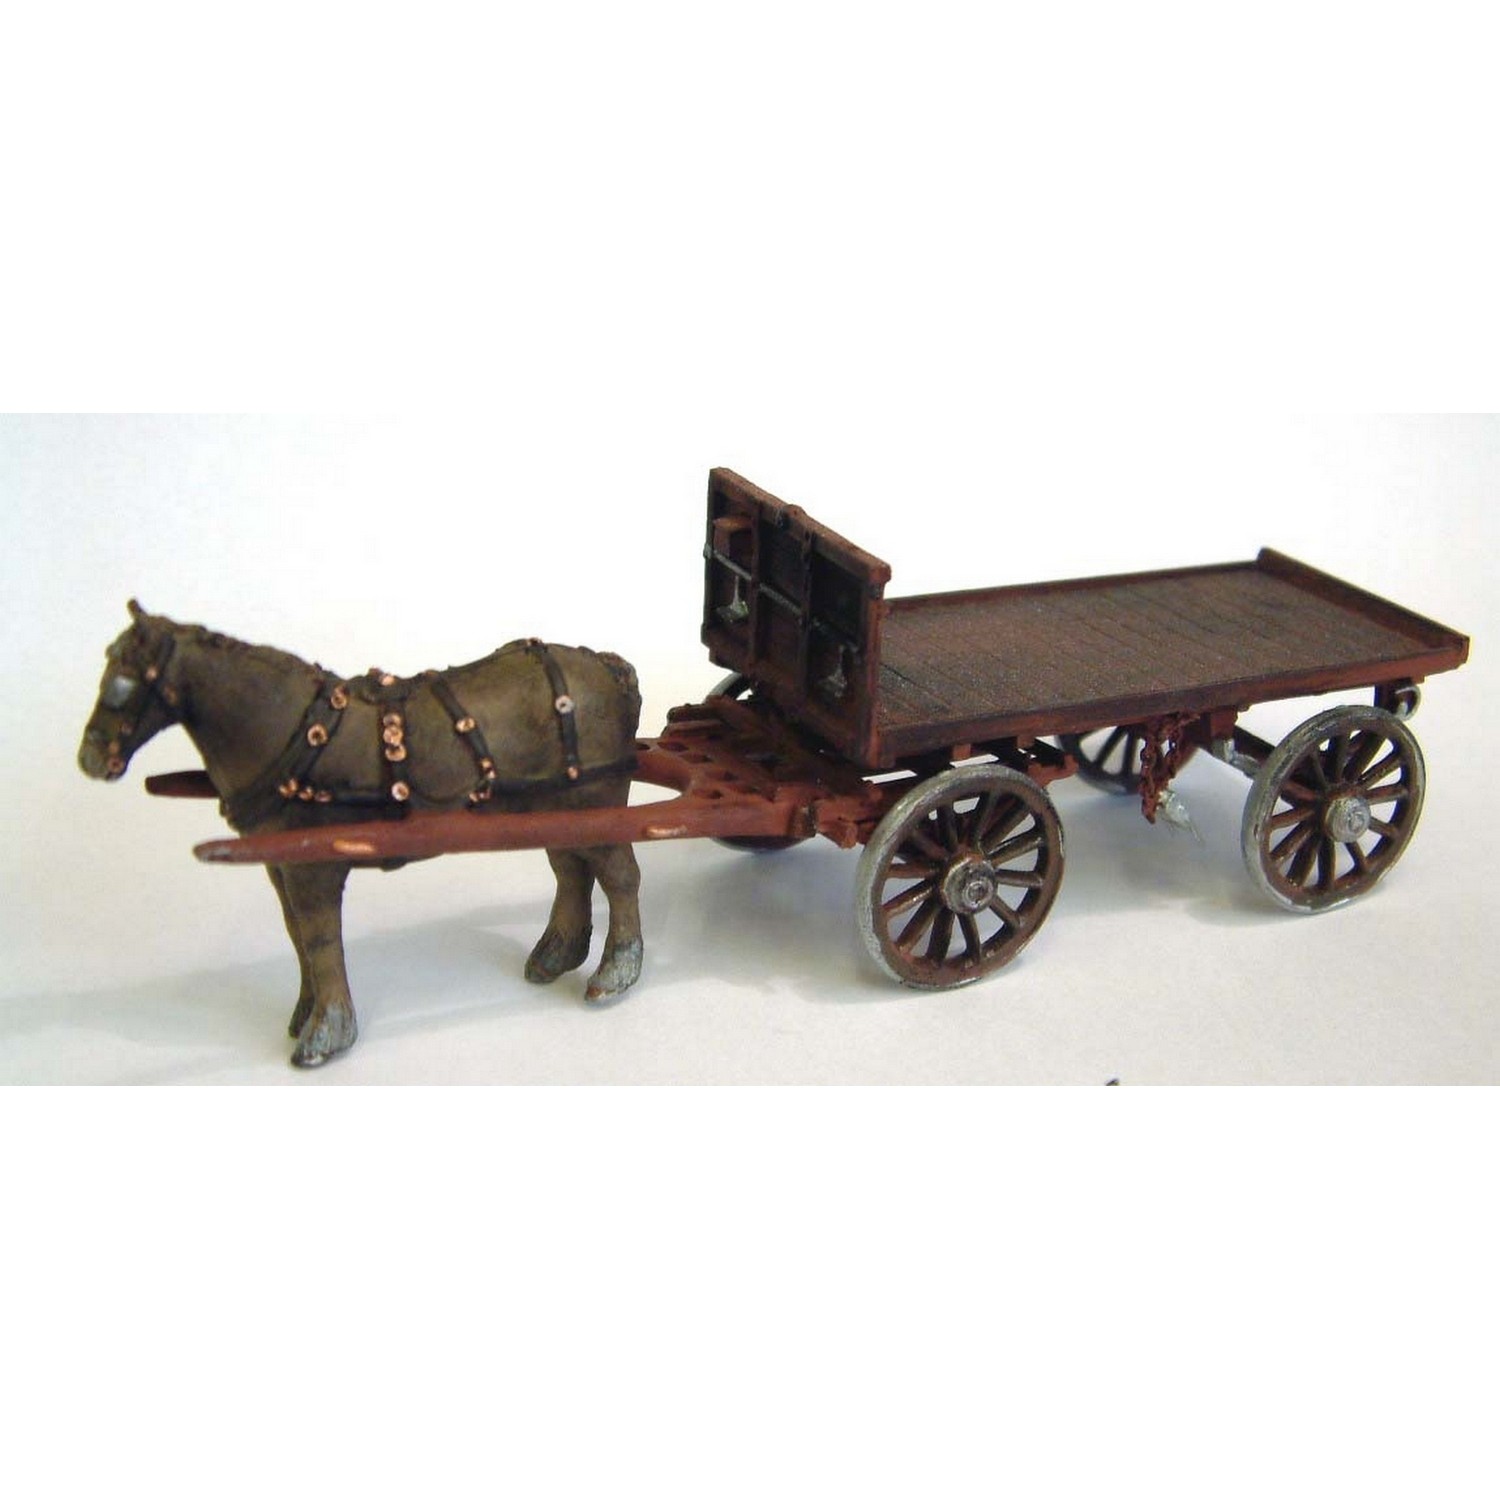 Horse Drawn Railway Flatbed Wagon O Scale 1:43 UNPAINTED Kit M23 Langley Models 